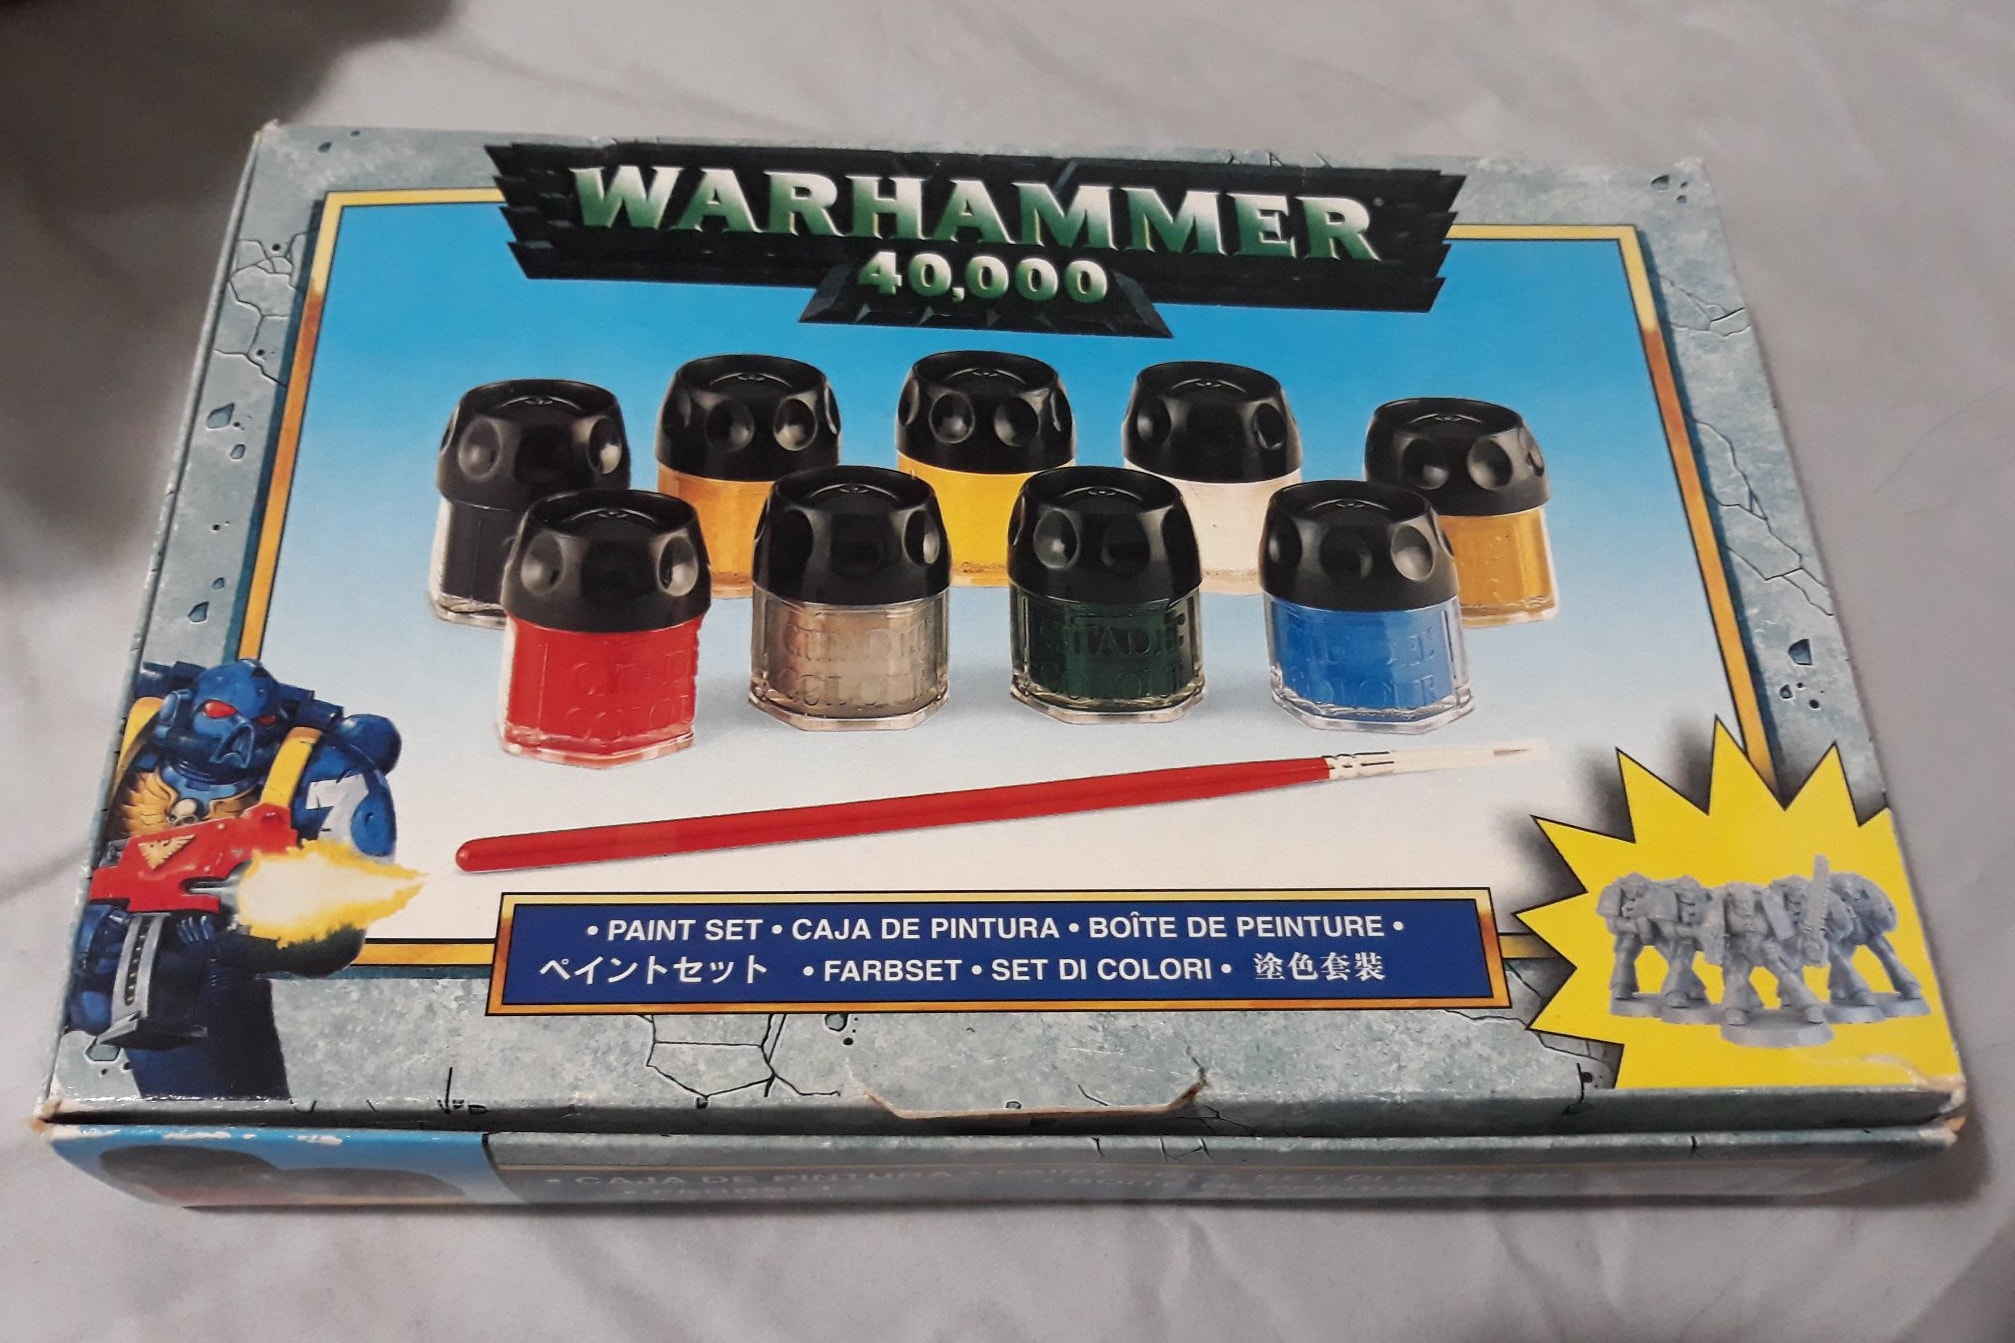 The Warhammer Paint Set with Space Marines, circa 1993.